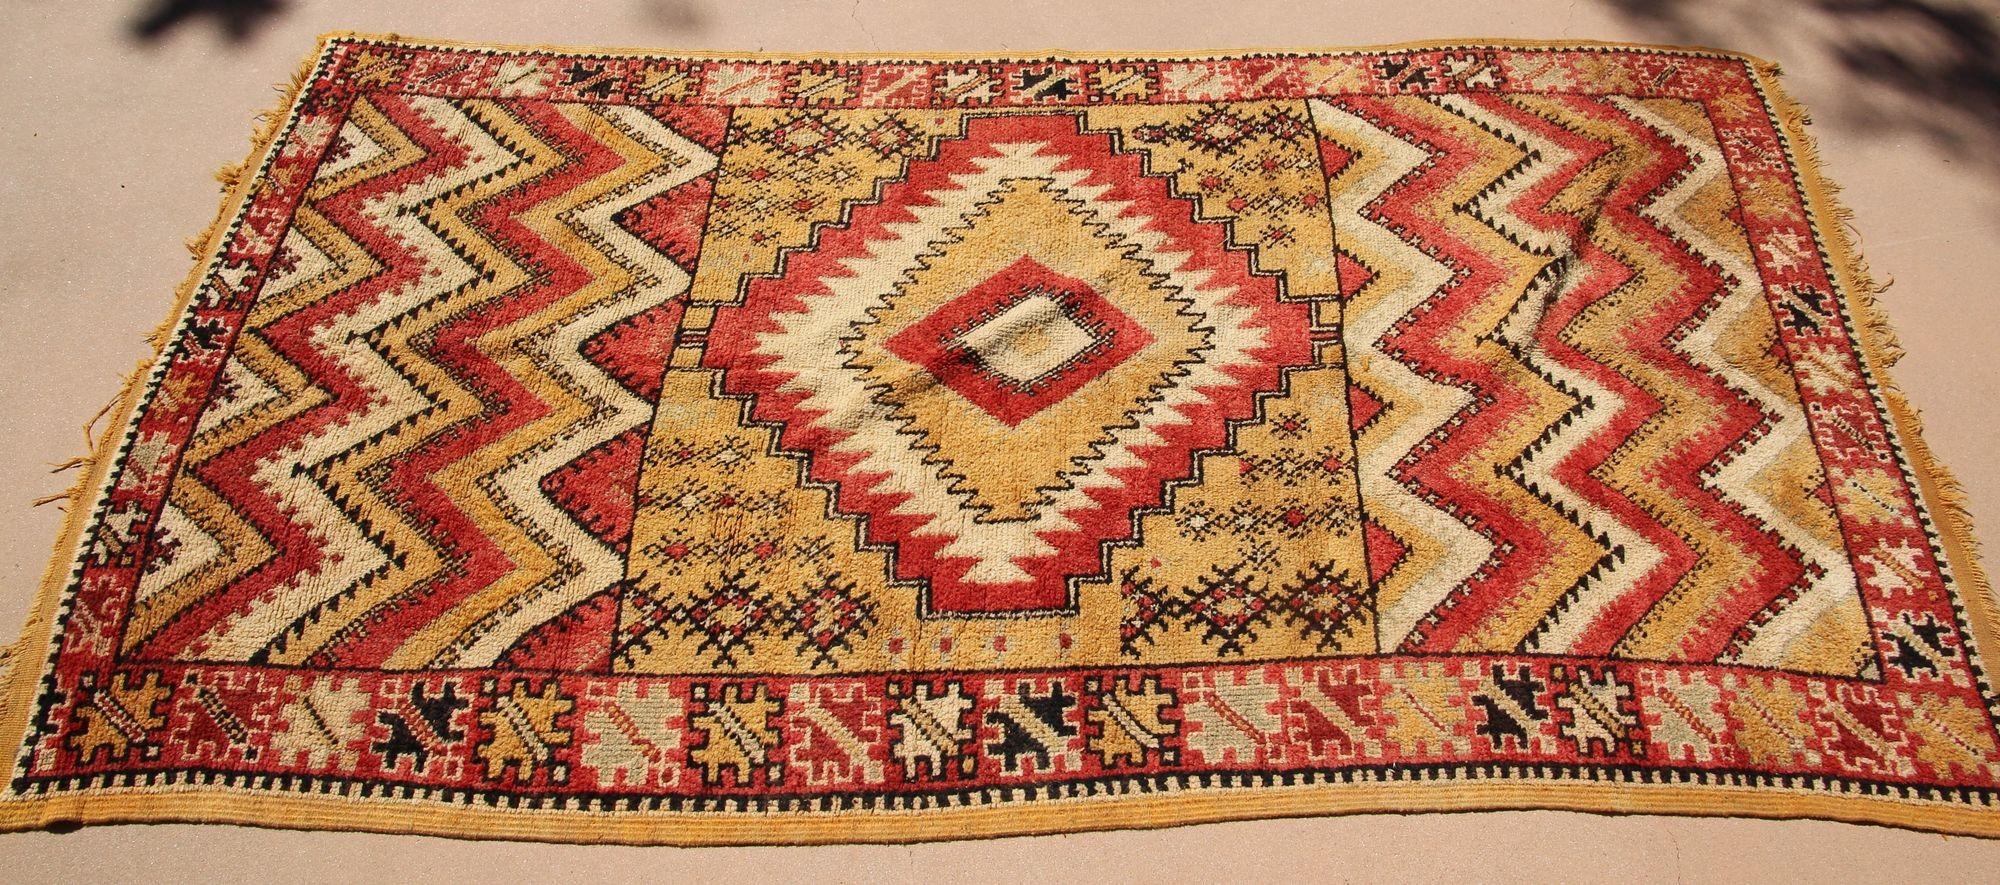 1960s Moroccan authentic Berber Rug Orange Yellow and Ivory.For centuries the tribal people of Morocco's Atlas Mountains have passed down the delicate art of rug-weaving. In Northern Africa rugs are not only a practical asset to the home, they are